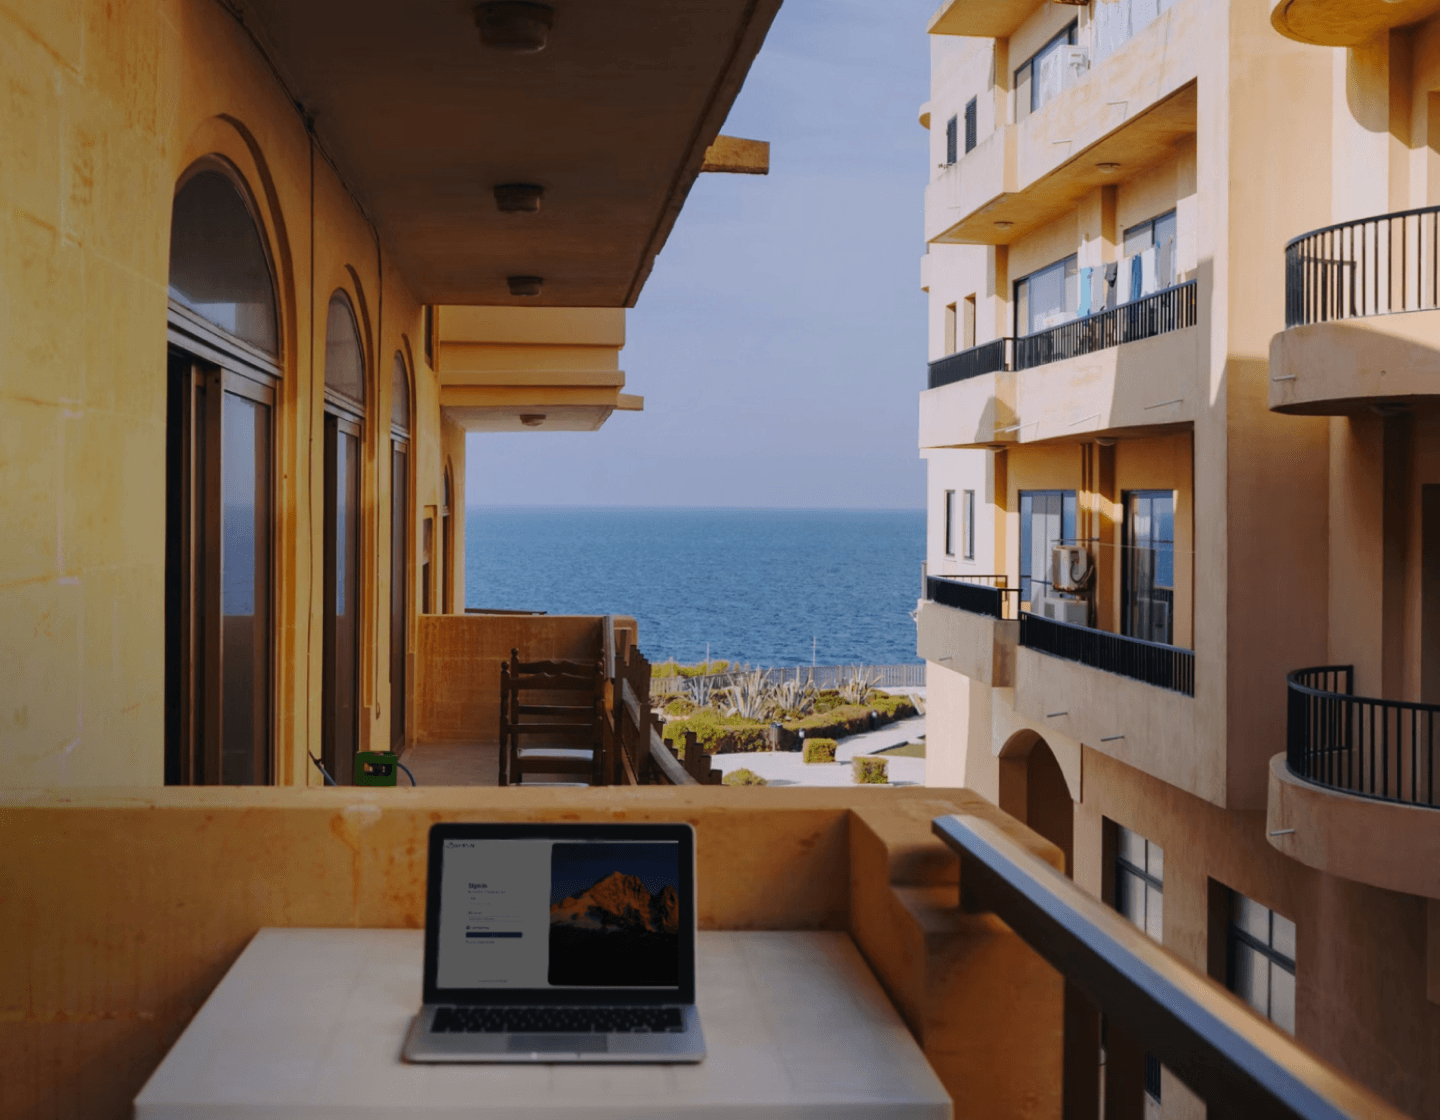 Work remotely with Spiky and enjoy the view of the ocean from your balcony. Export, filter, and drilldown on data quickly.